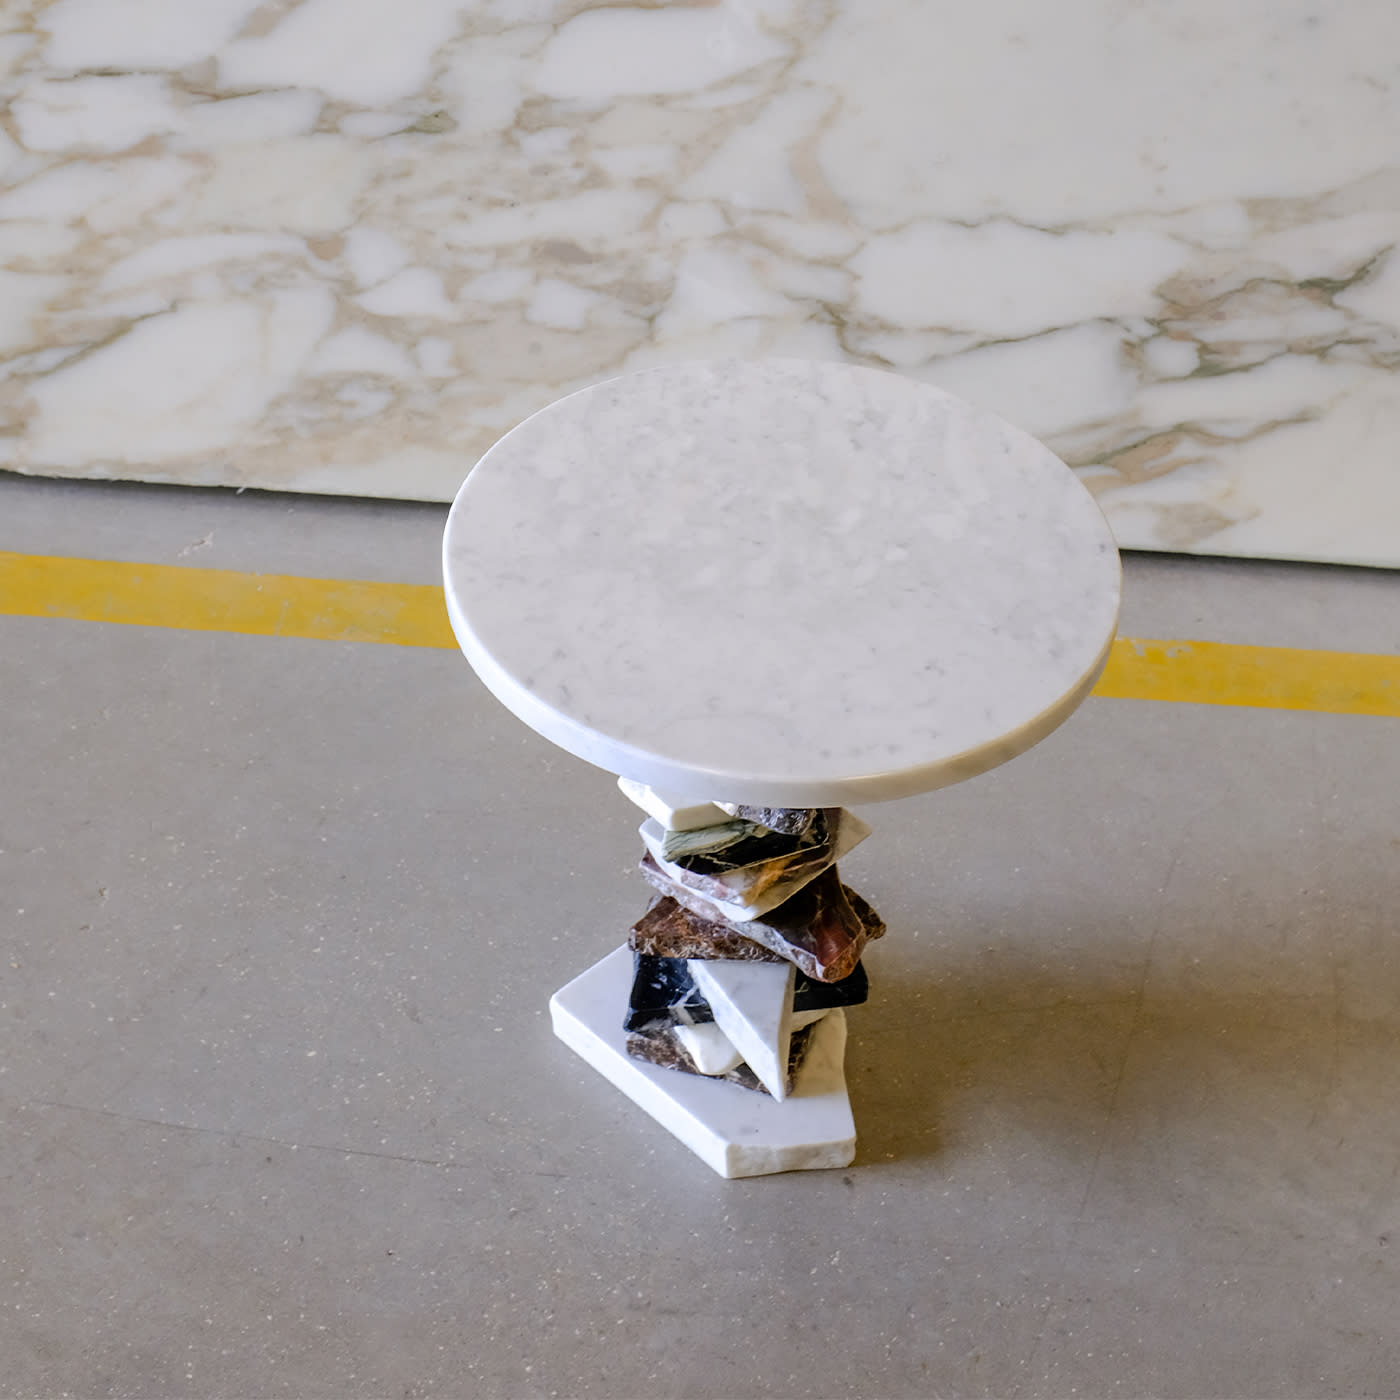 Carrara Gioia marble Small Side Table - Stone Stackers